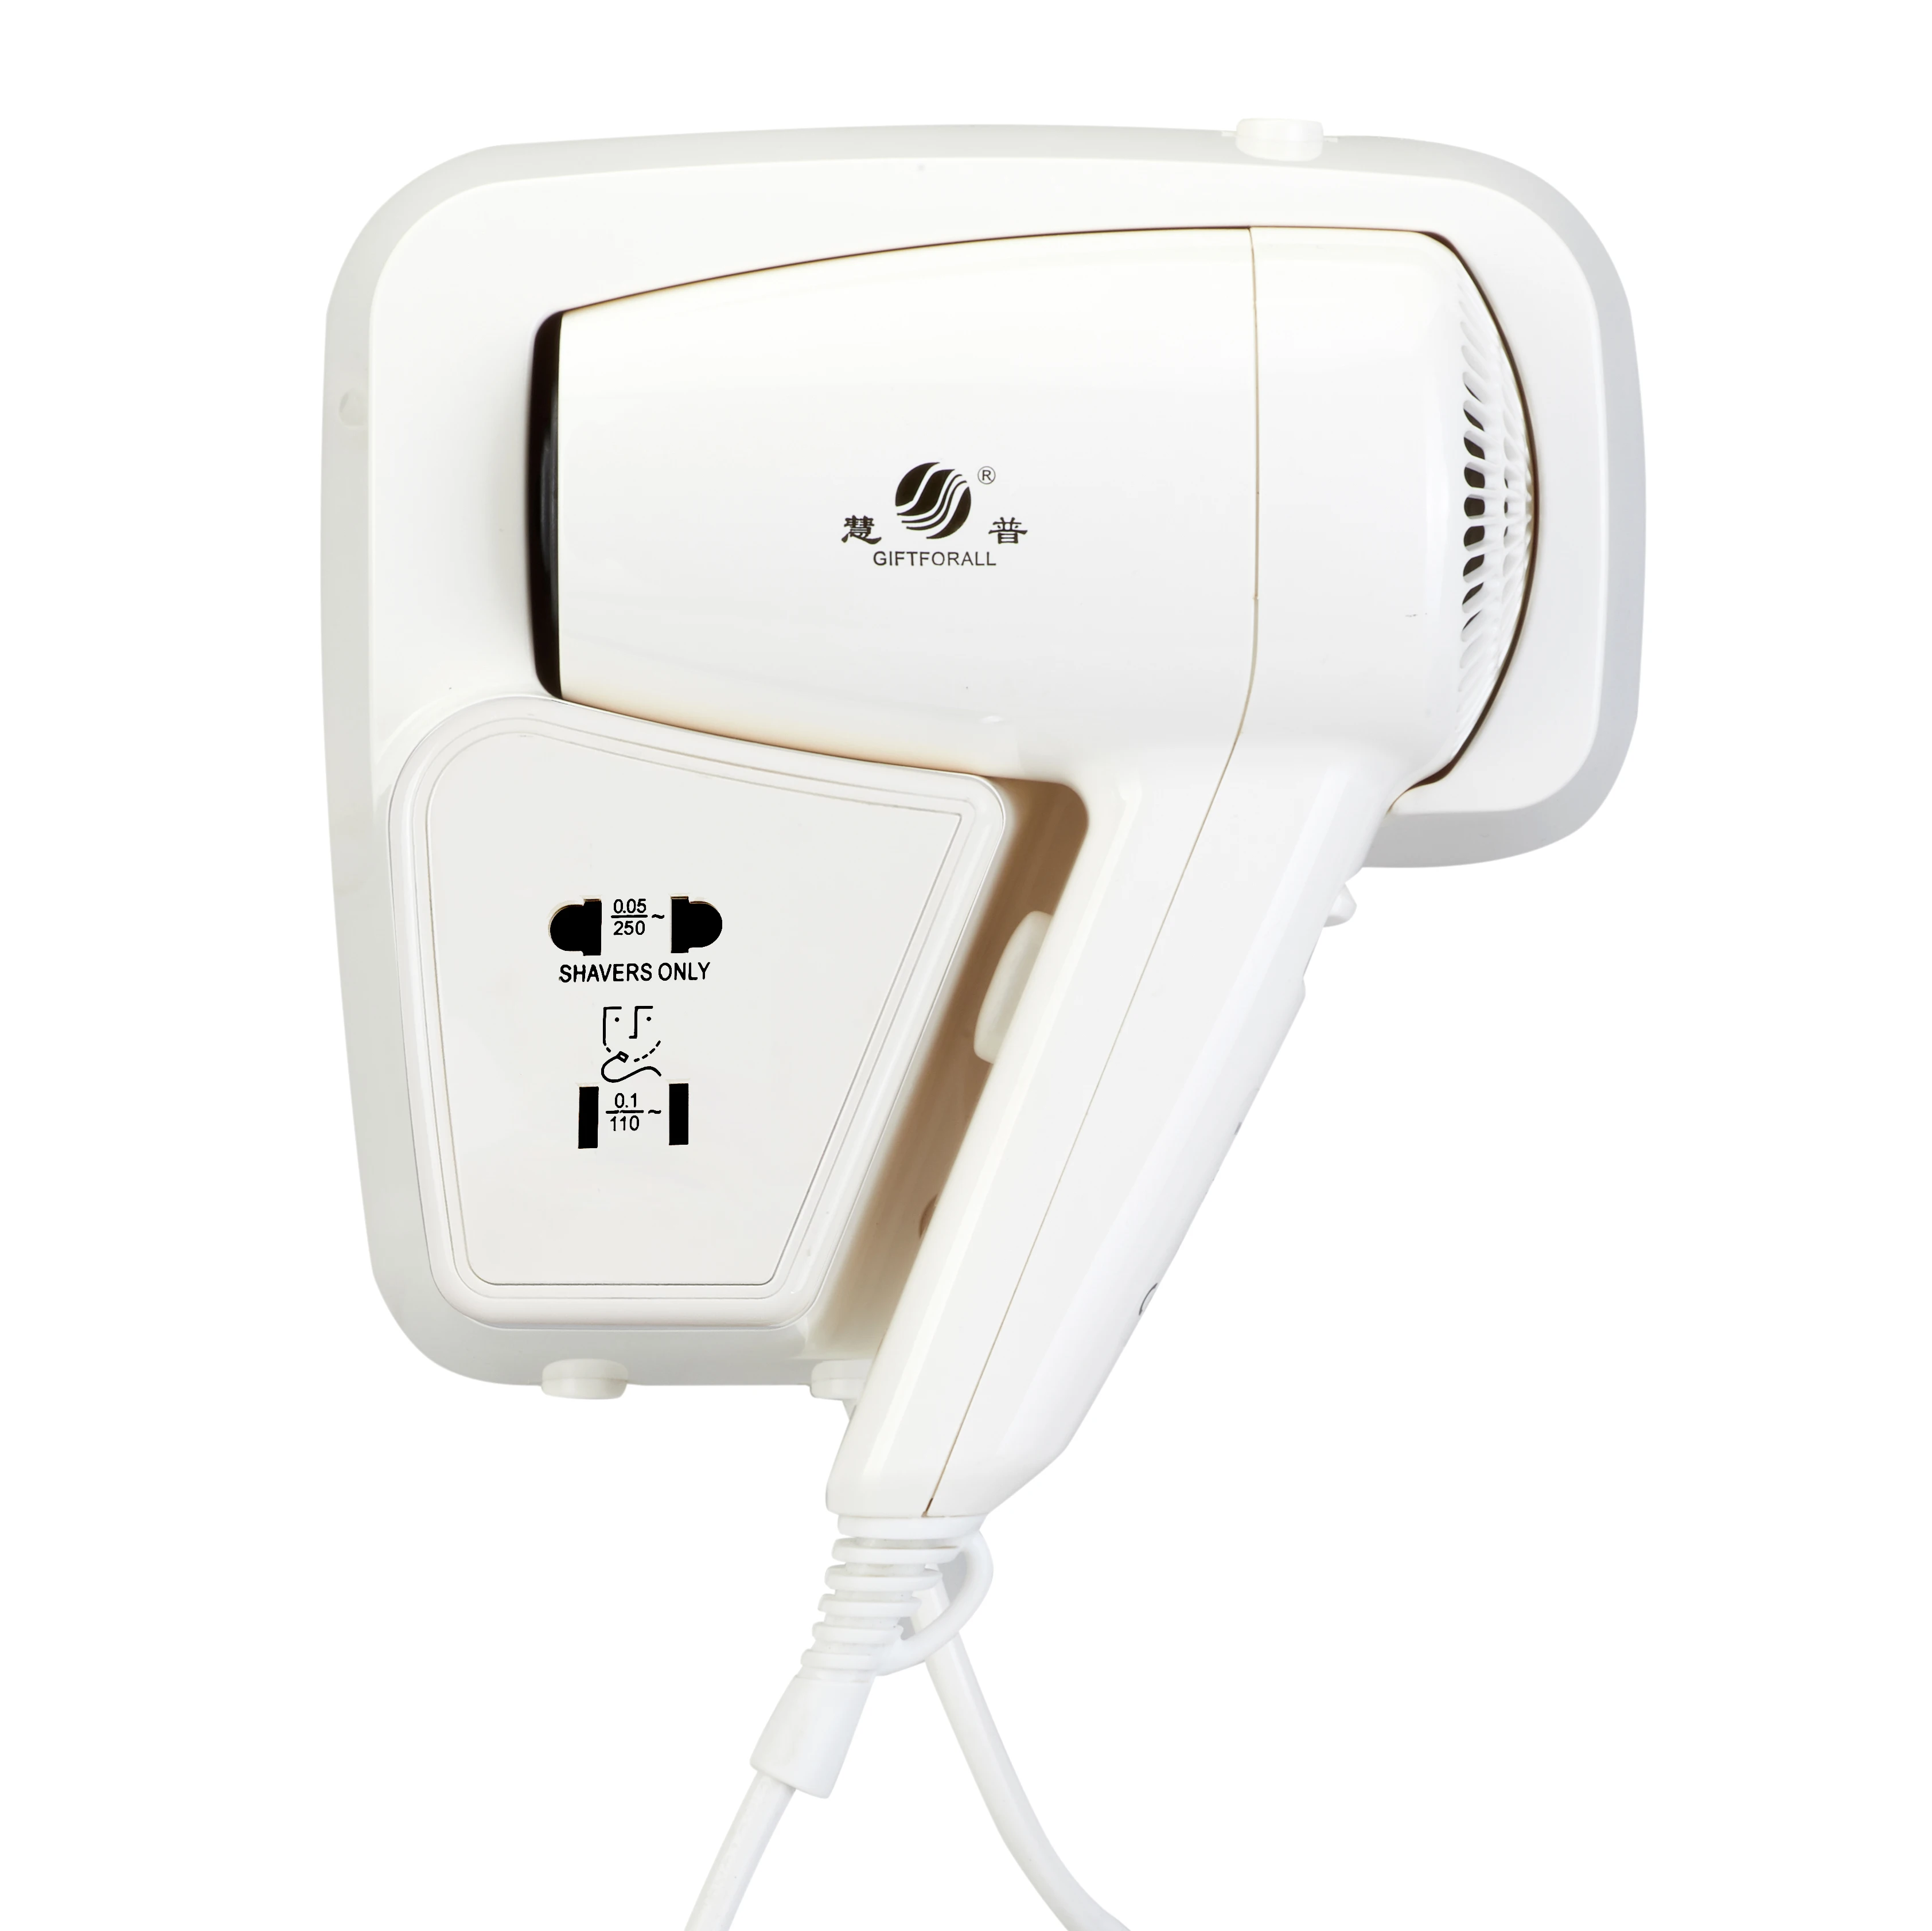 Classic Wall Mounted Hair Dryer For Hotel Room Use,1200 W - Buy Hair  Dryer,Wall Mounted Hotel Hair Dryer,Wall Hair Dryer Product on 